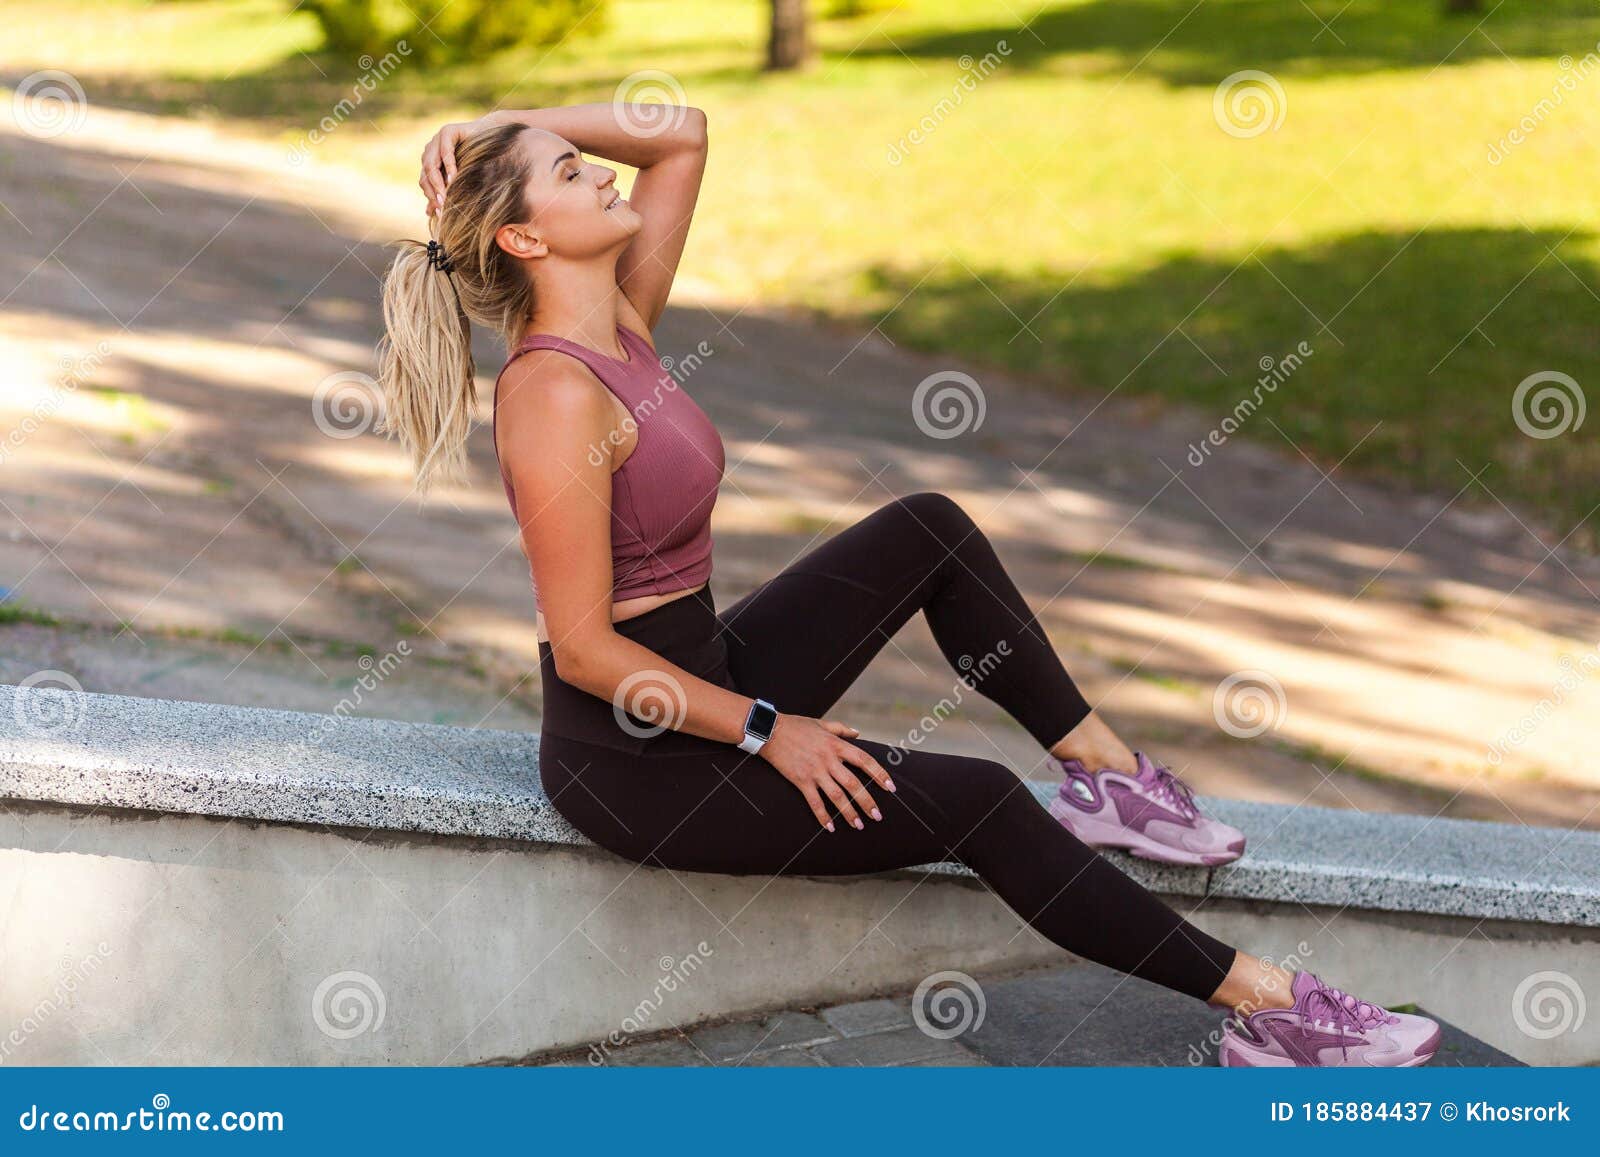 Blonde ass in yoga pants 6 093 Sexy Yoga Woman Photos Free Royalty Free Stock Photos From Dreamstime